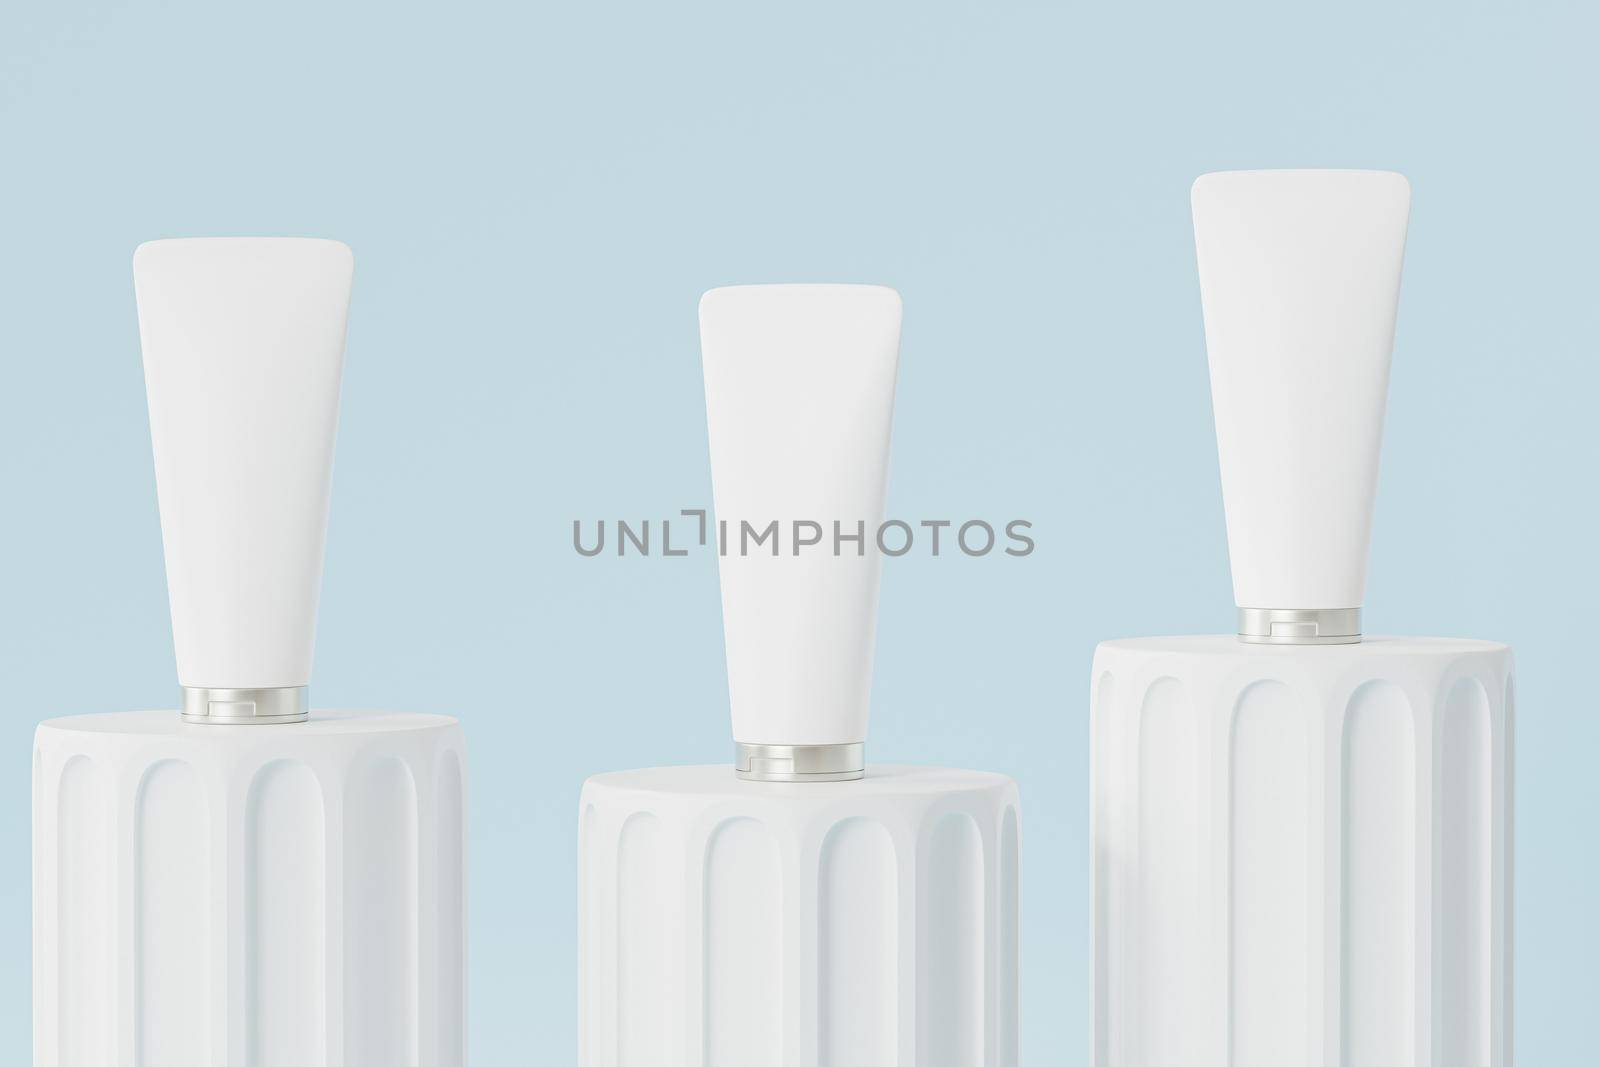 Mockup lotion tube for cosmetics products, template or advertising on pillar podium, minimal 3d illustration render